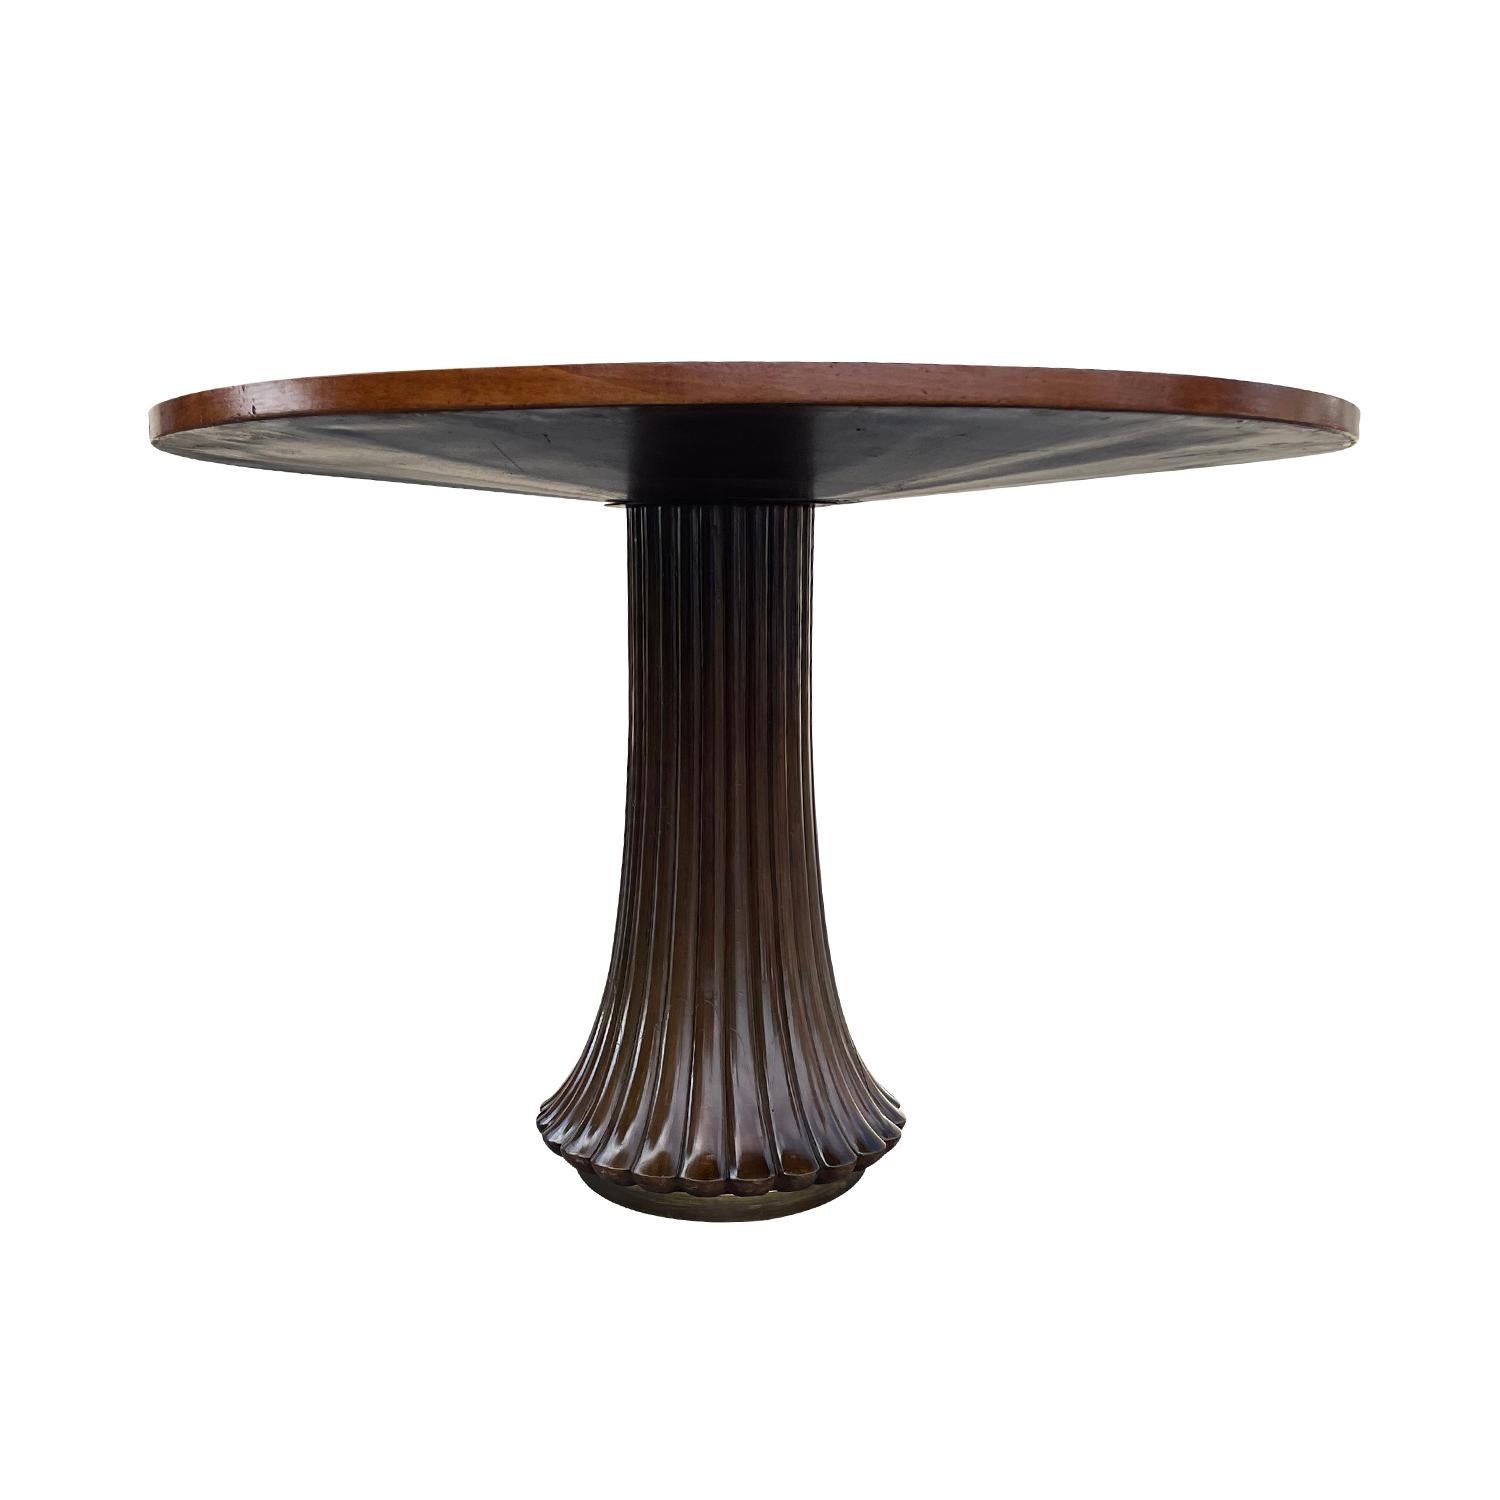 A vintage Mid-Century Modern dining room table made of hand crafted polished Rosewood with a round Walnut top, in good condition. The sculpture table is supported by a round wooden, brass foot enhanced by detailed wood carvings. Wear consistent with